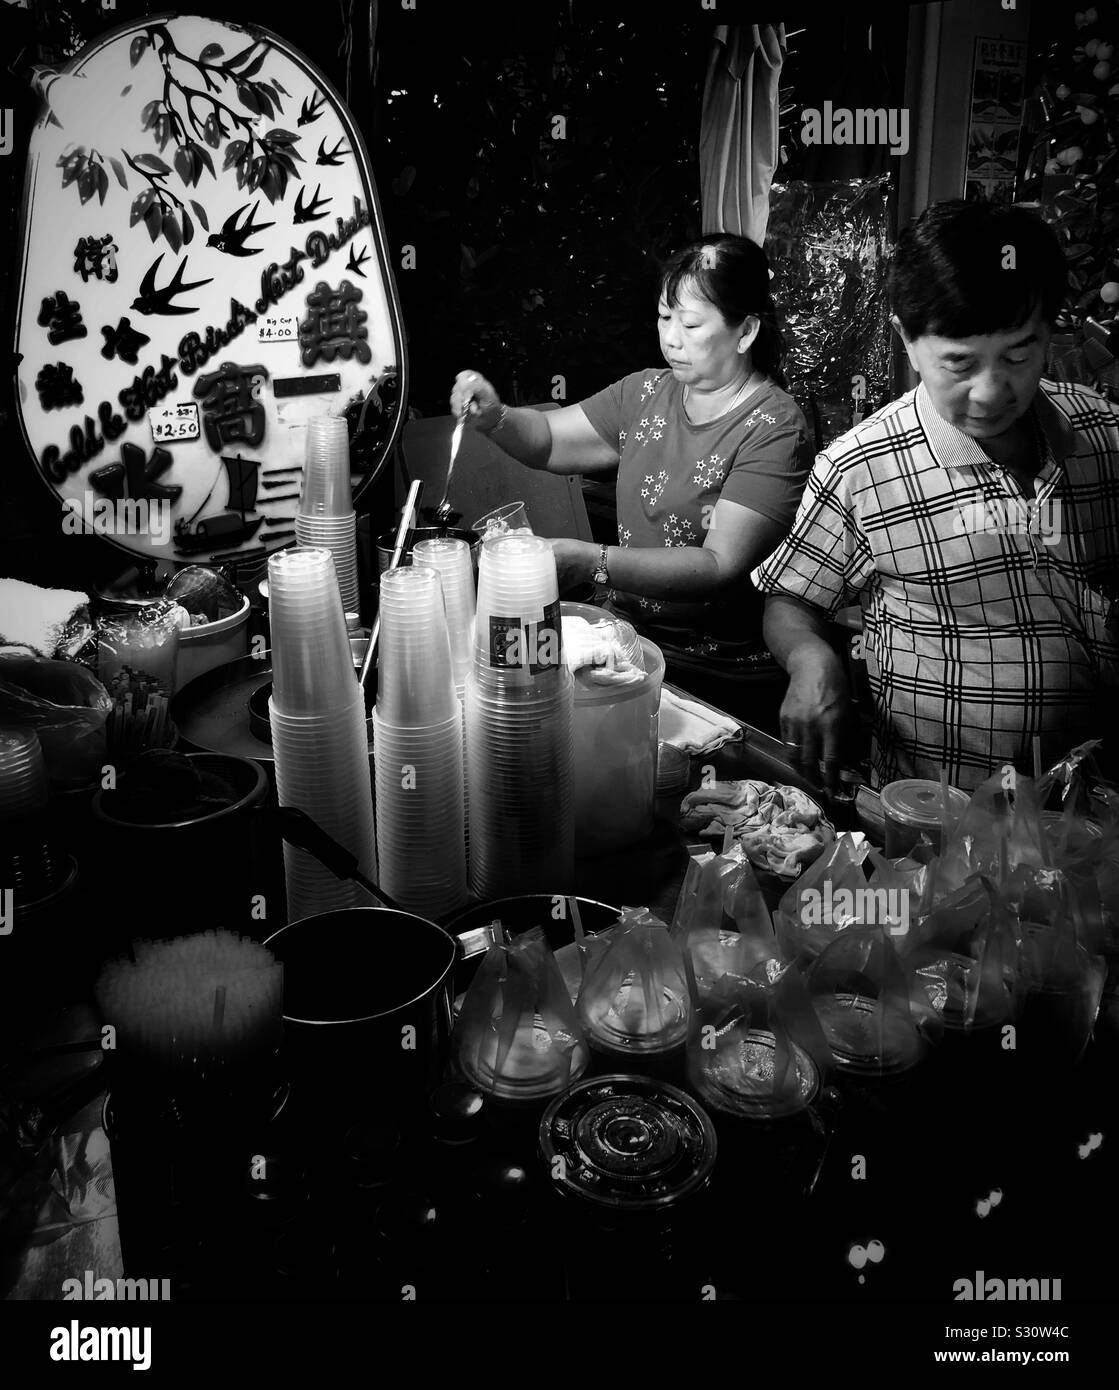 Hawker selling drinks Stock Photo